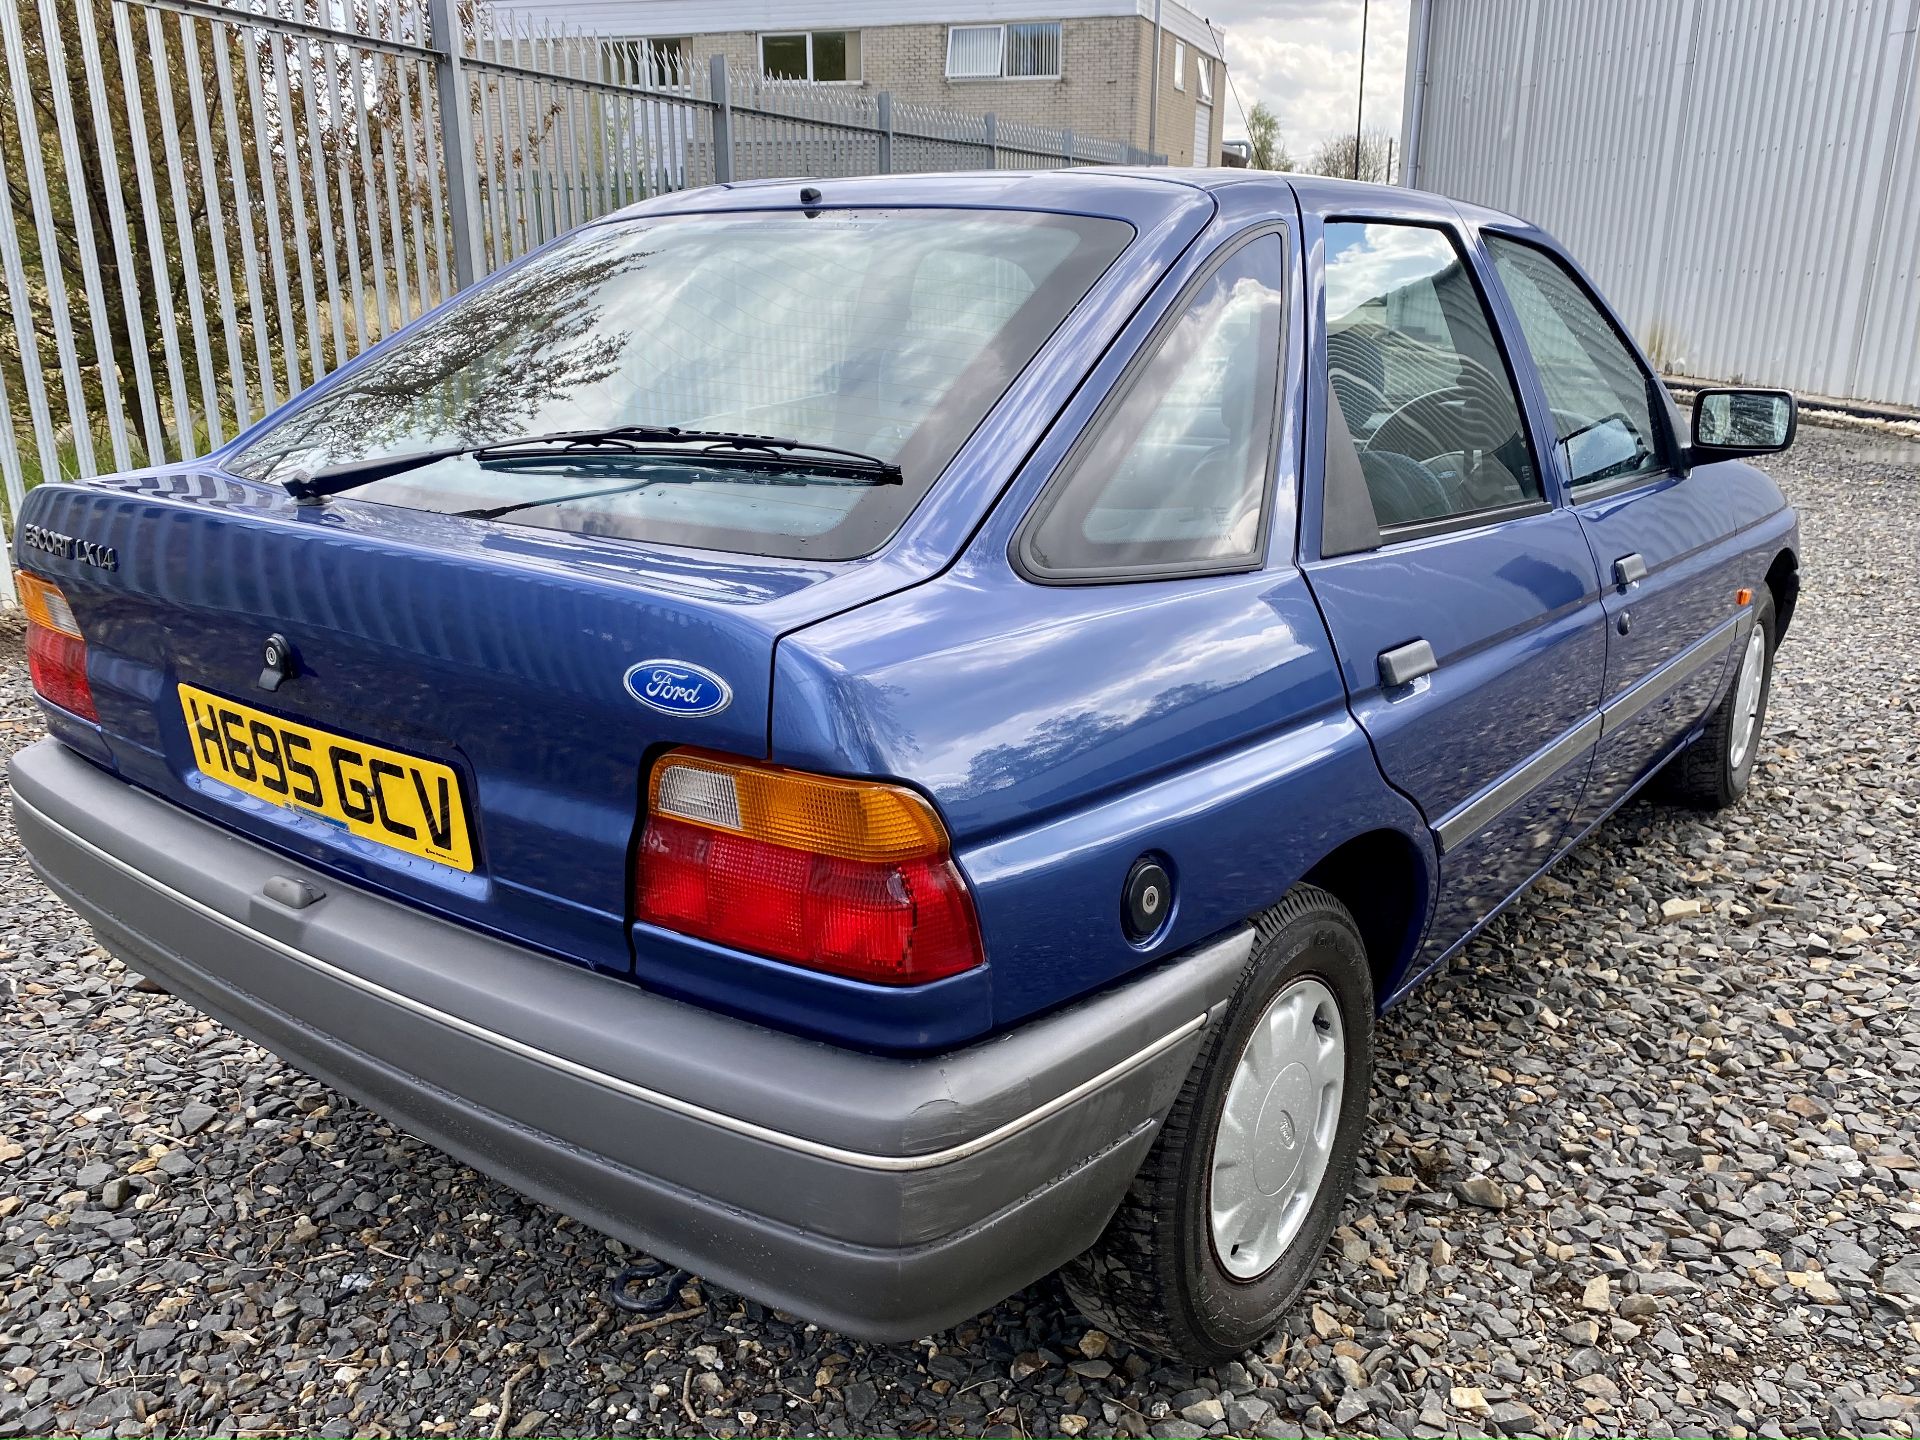 Ford Escort LX1.4 - Image 25 of 54